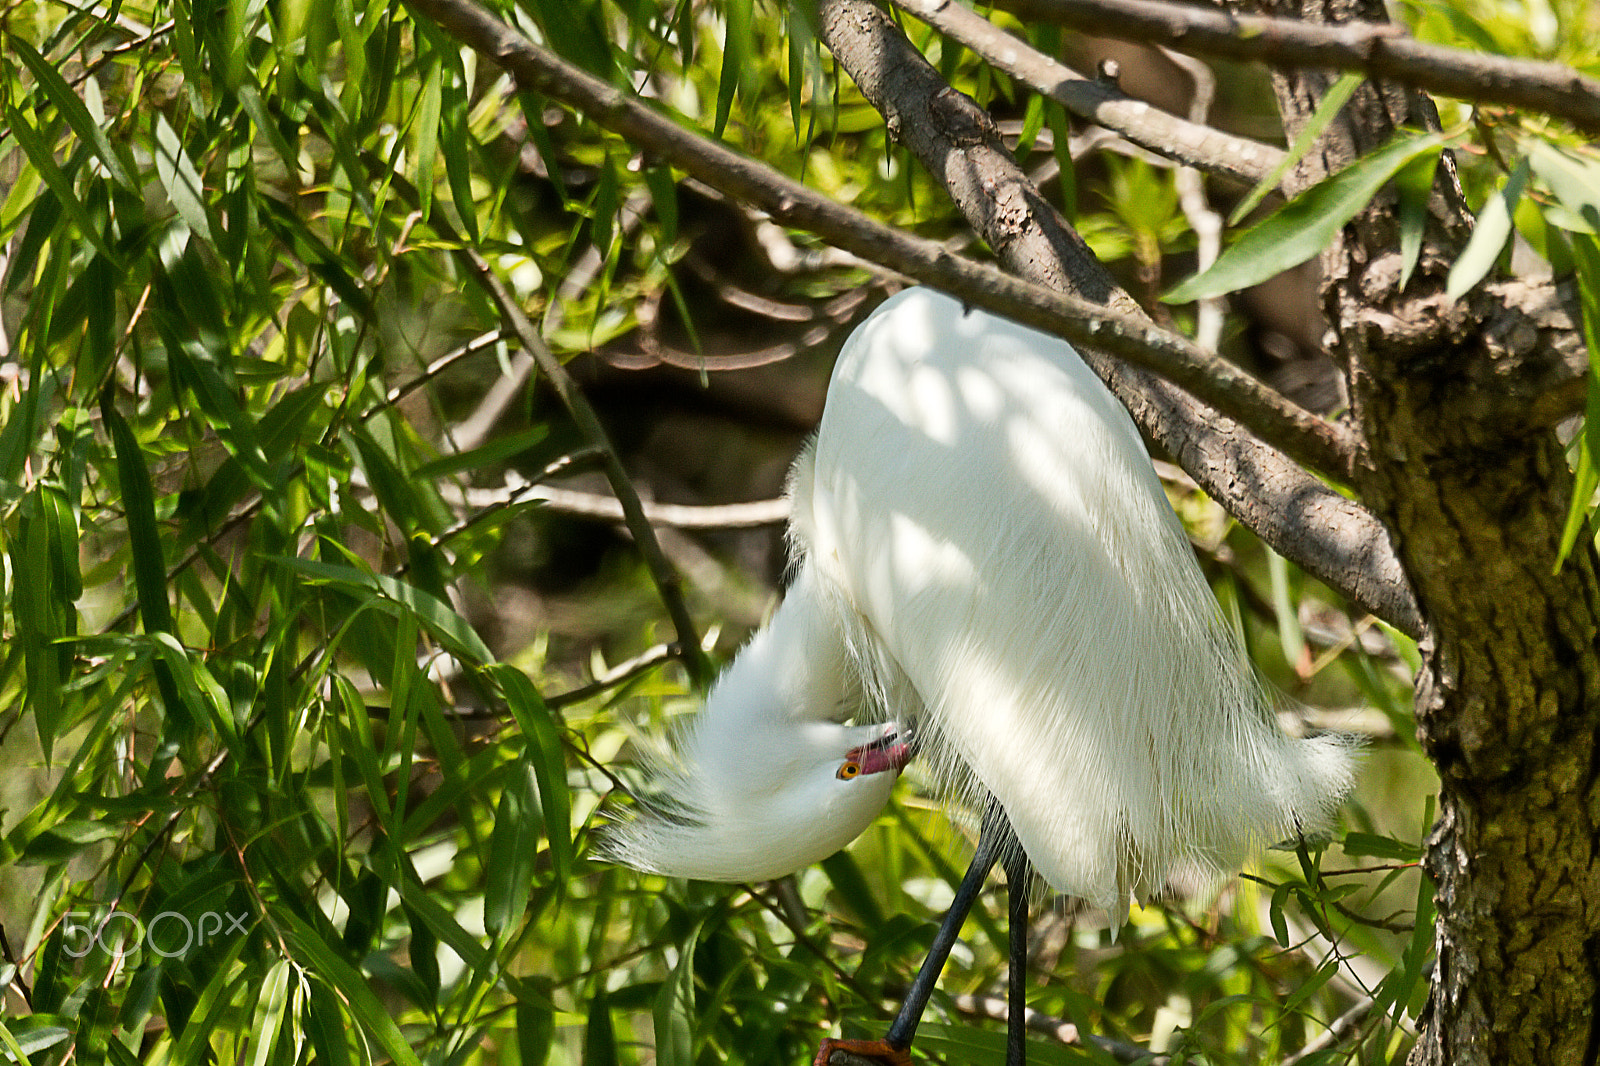 Canon EOS 5DS + Sigma 150-600mm F5-6.3 DG OS HSM | C sample photo. Snowy egret with mating plumage preening photography